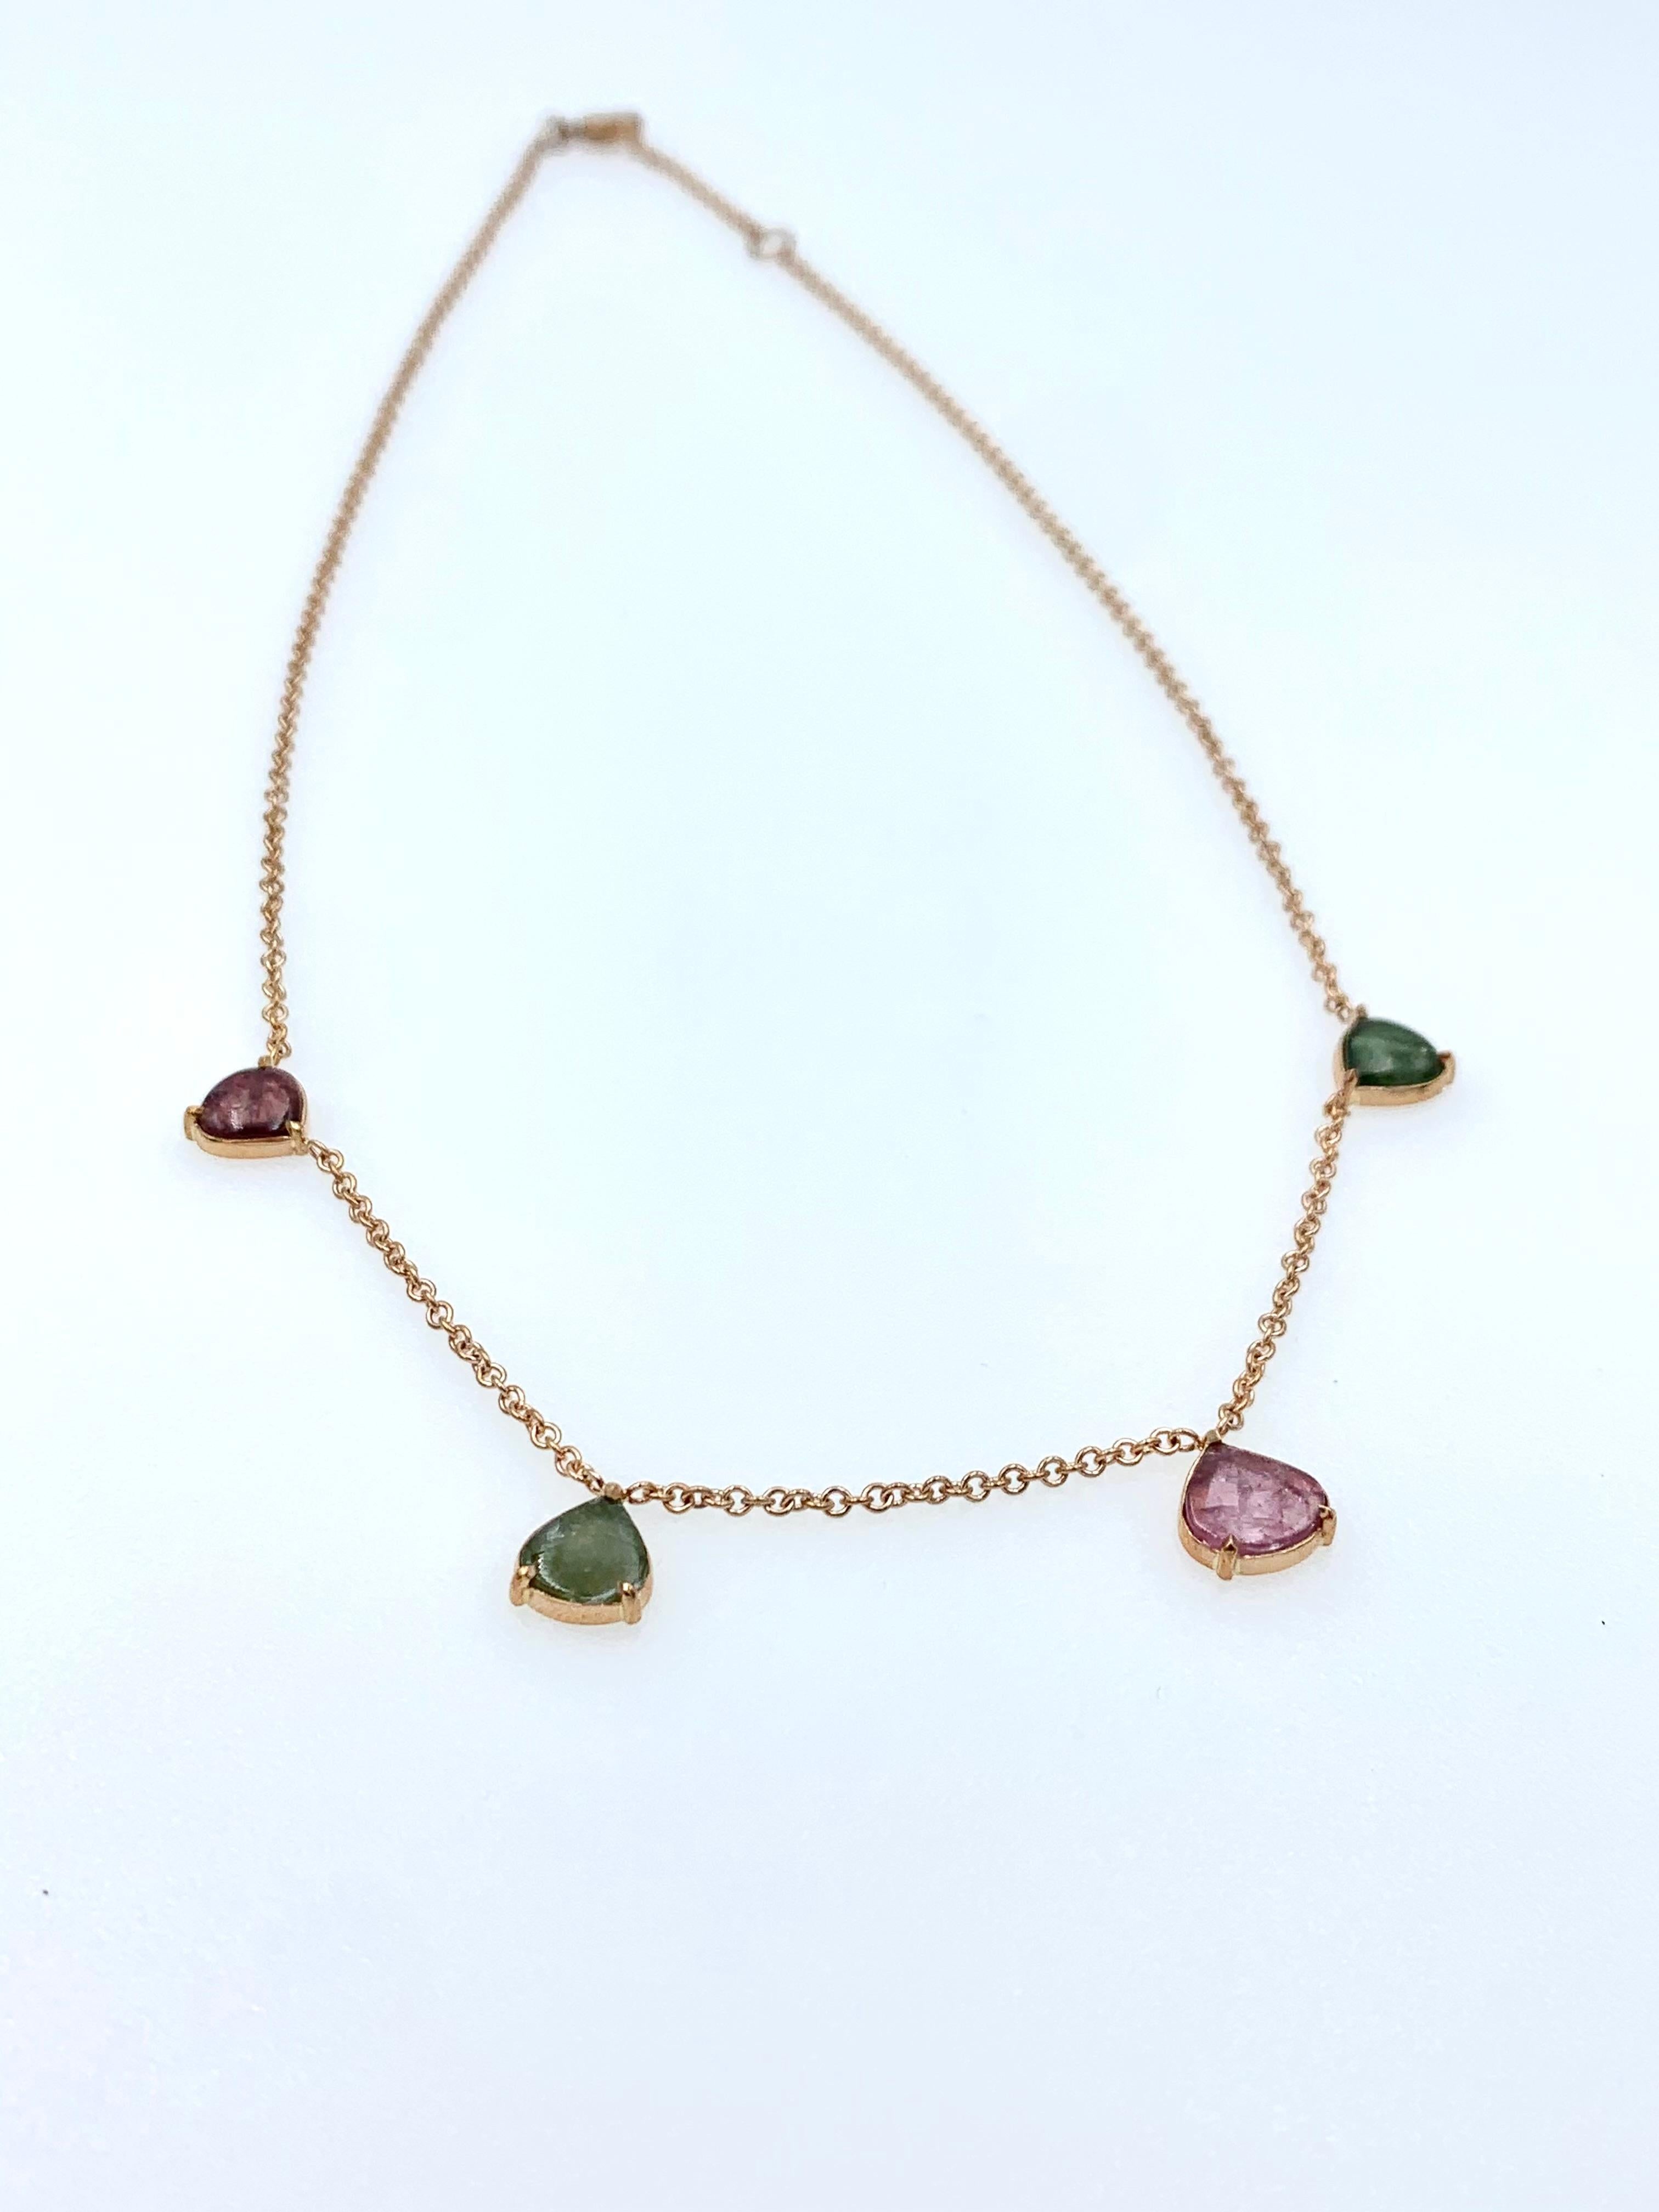 Hand made in 9 karat Rose gold, this chain choker necklace has four stones distributed around the neckline in two different colours: two drop shaped deep green cabochons and two pink drop shaped cabochons. This dainty piece is part of our Ethereal